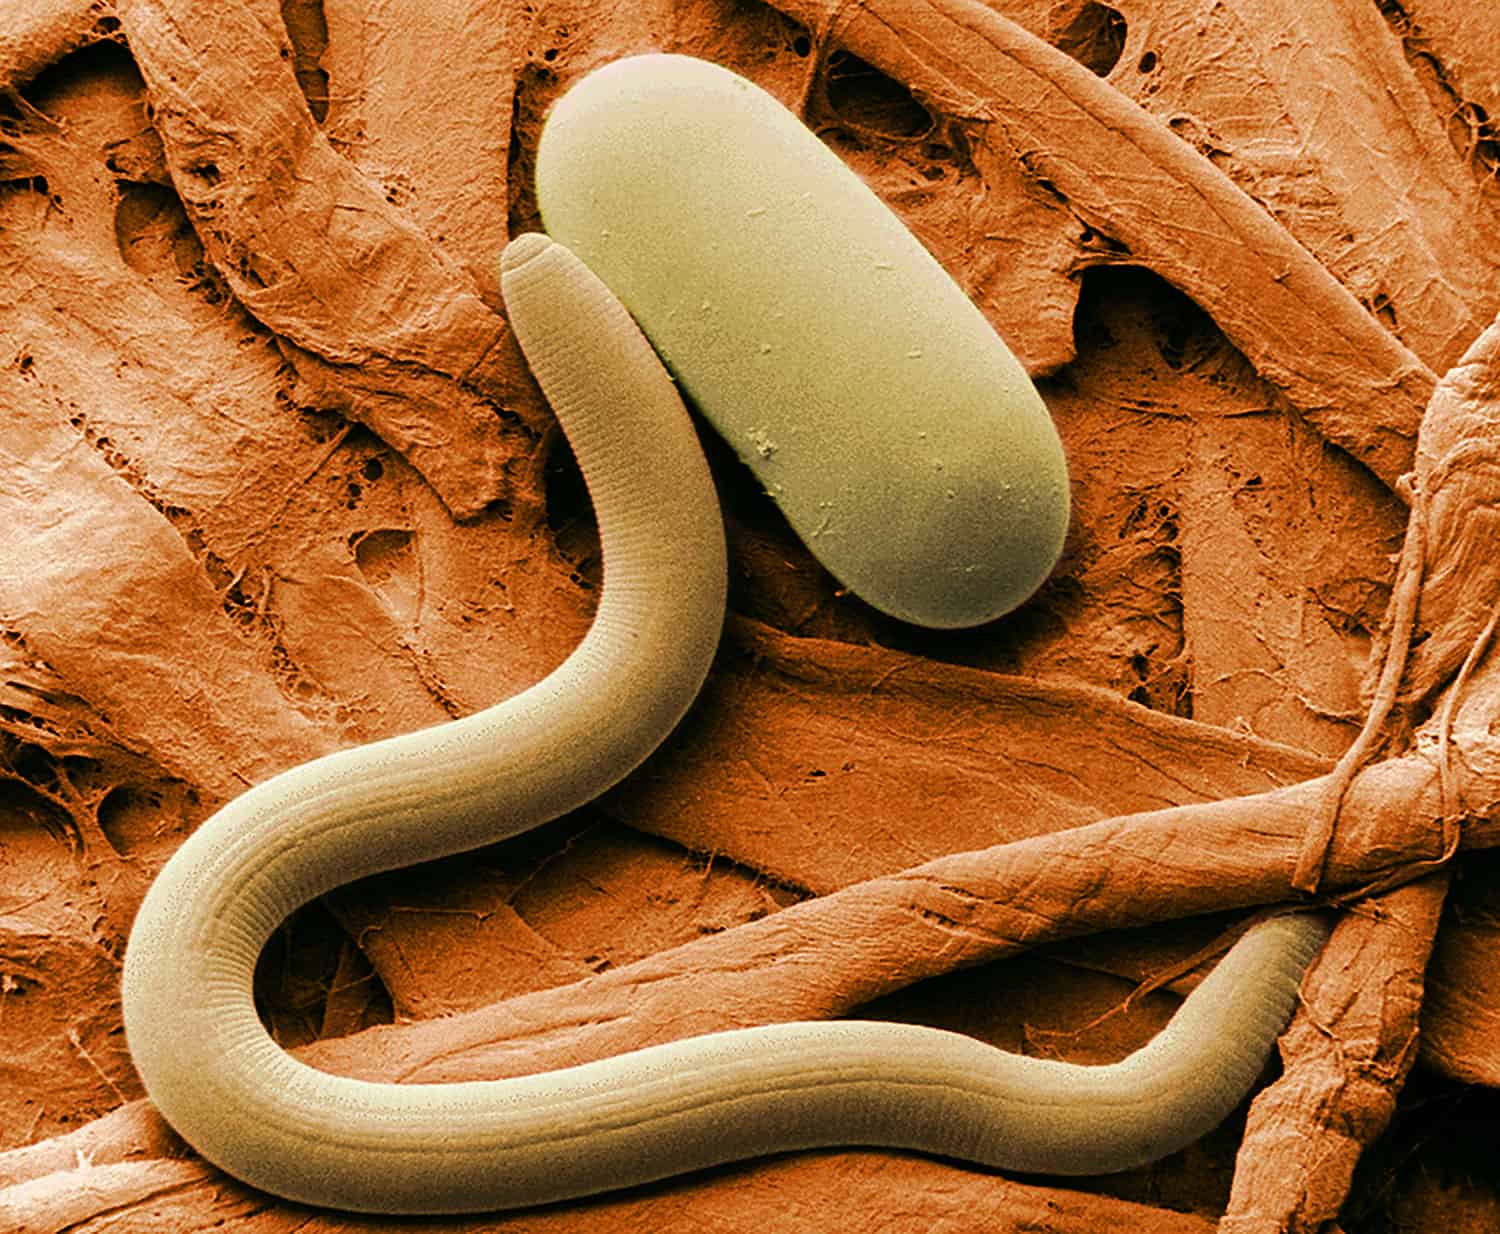 What Are Nematodes? These Tiny Worms Can Help or Hurt Your Garden